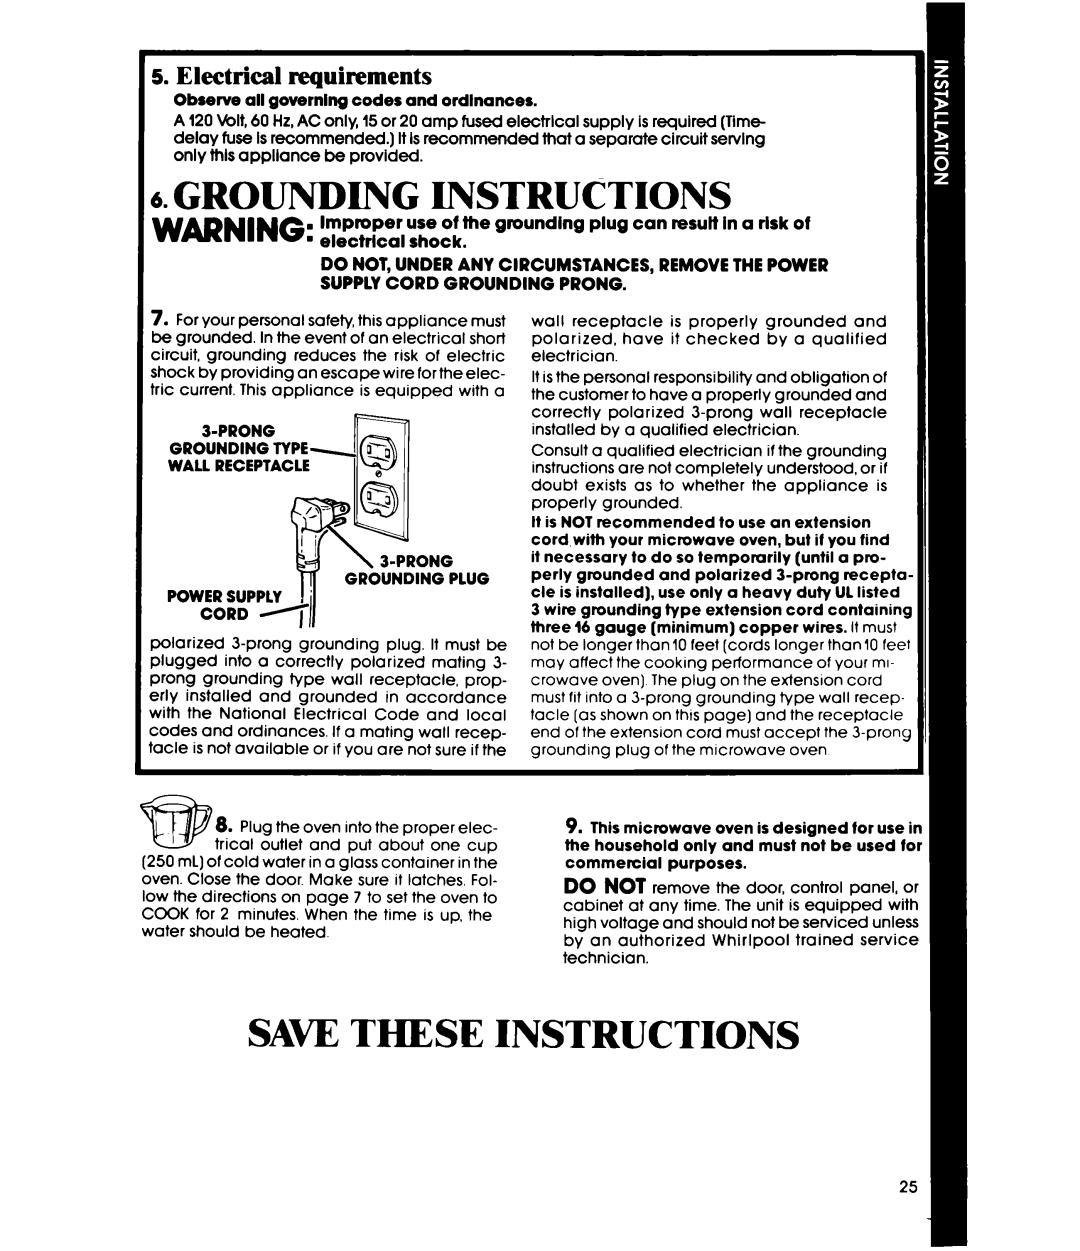 Whirlpool MW36OOXS manual Instructions, SAW 1THESE INSTRUCTIONS, Grounding, Electrical requirements 